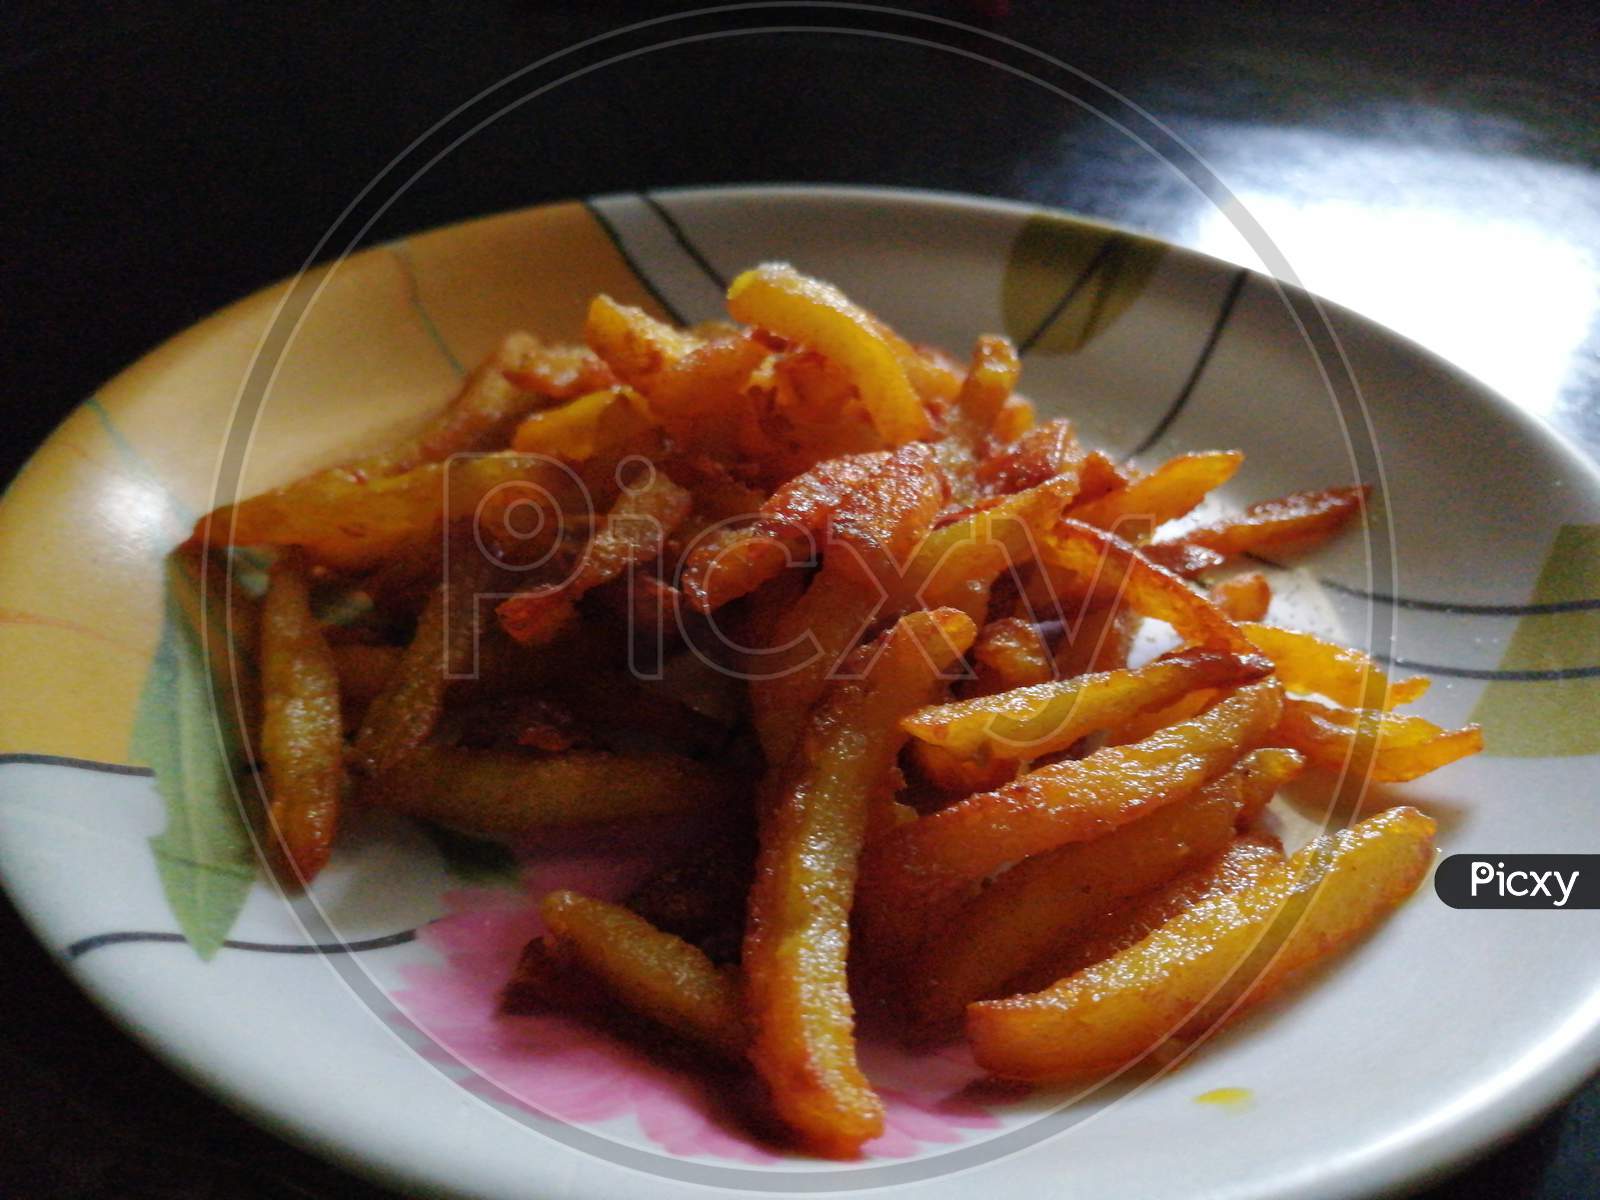 Home made delicious french fries🥓🥓🥓